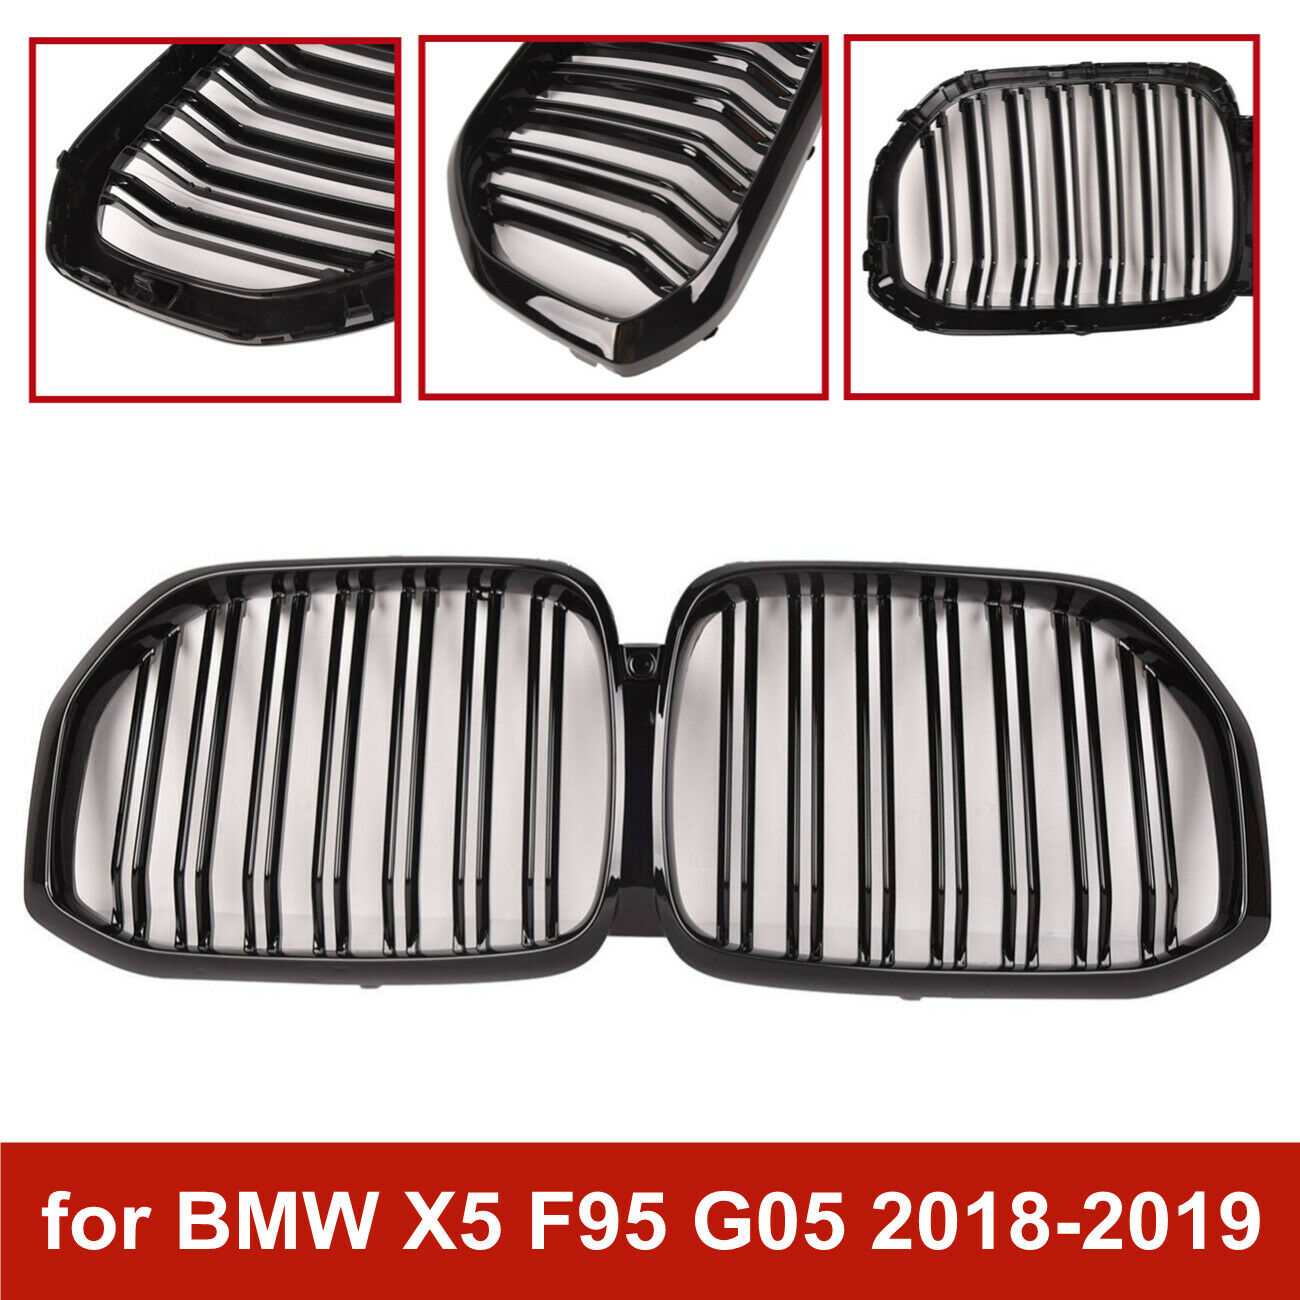 Gloss Black X5M Style Front Bumper Bar Kidney Grill for BMW X5 F95 G05